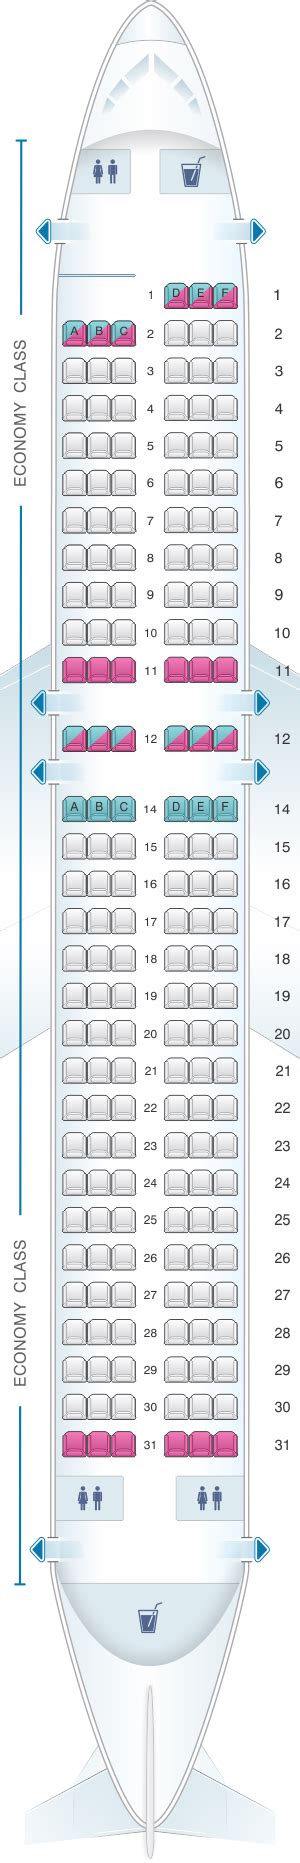 Airplane seating chart allegiant air. However, a good rule of thumb is that a bag under 16 x 12 x 6 inches should be accepted as underseat luggage by most airlines. Some airlines have more specific size restrictions that can range from around 13 x 10 x 8 inches up to 18 x 14 x 10 inches for underseat bags. Remember that these dimensions are approximate and can vary … 